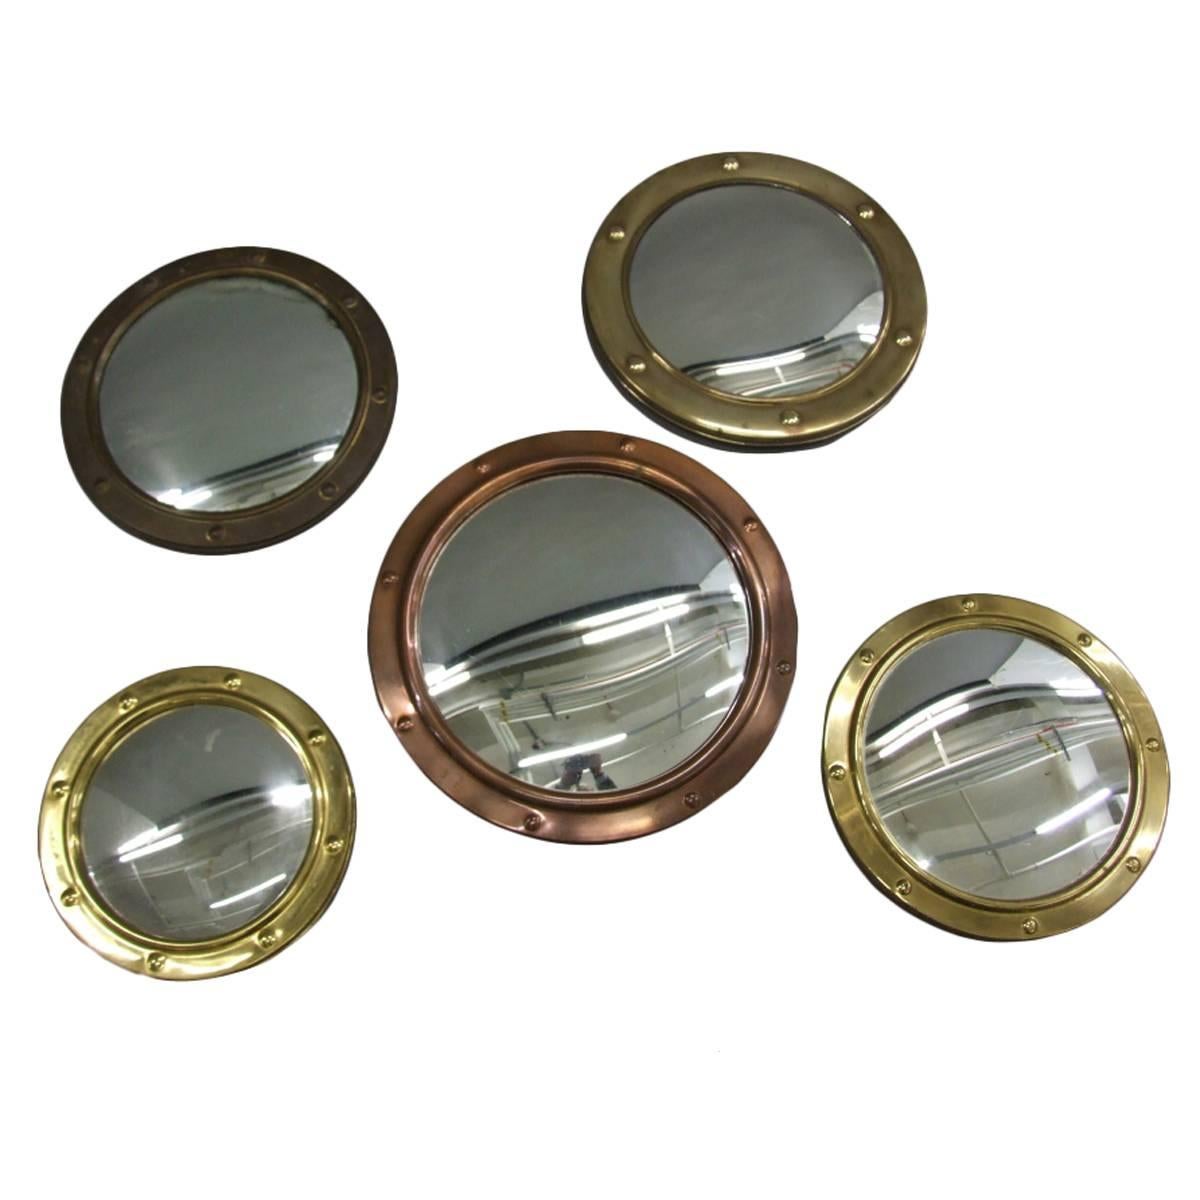 Collection of 1920s Convex Mirrors